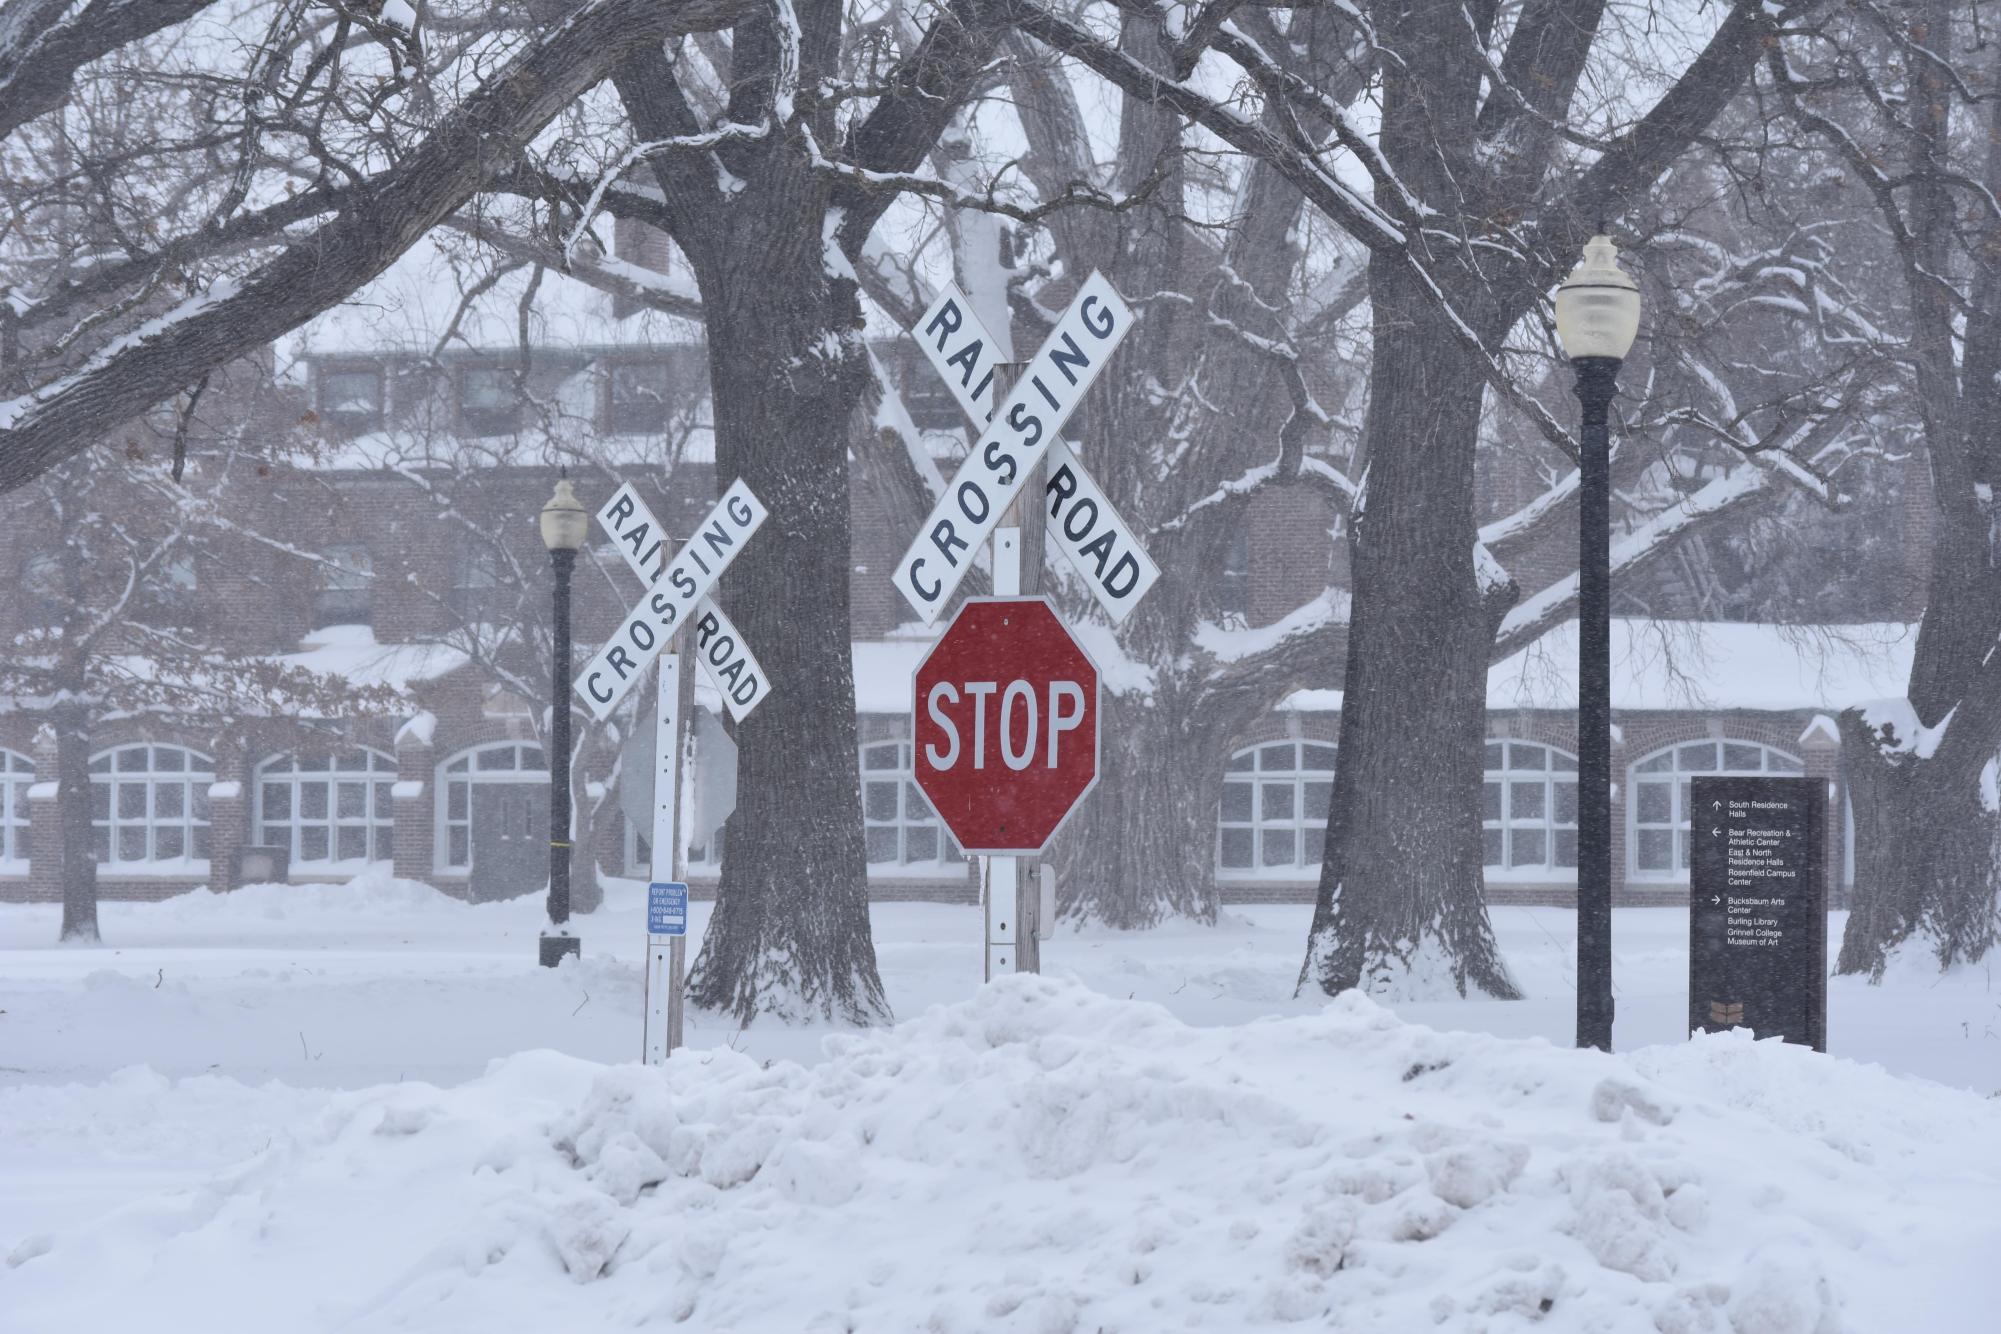 Grinnell College was enveloped in a thick layer of snow as consecutive snowstorms brought more than twelve inches of snow.